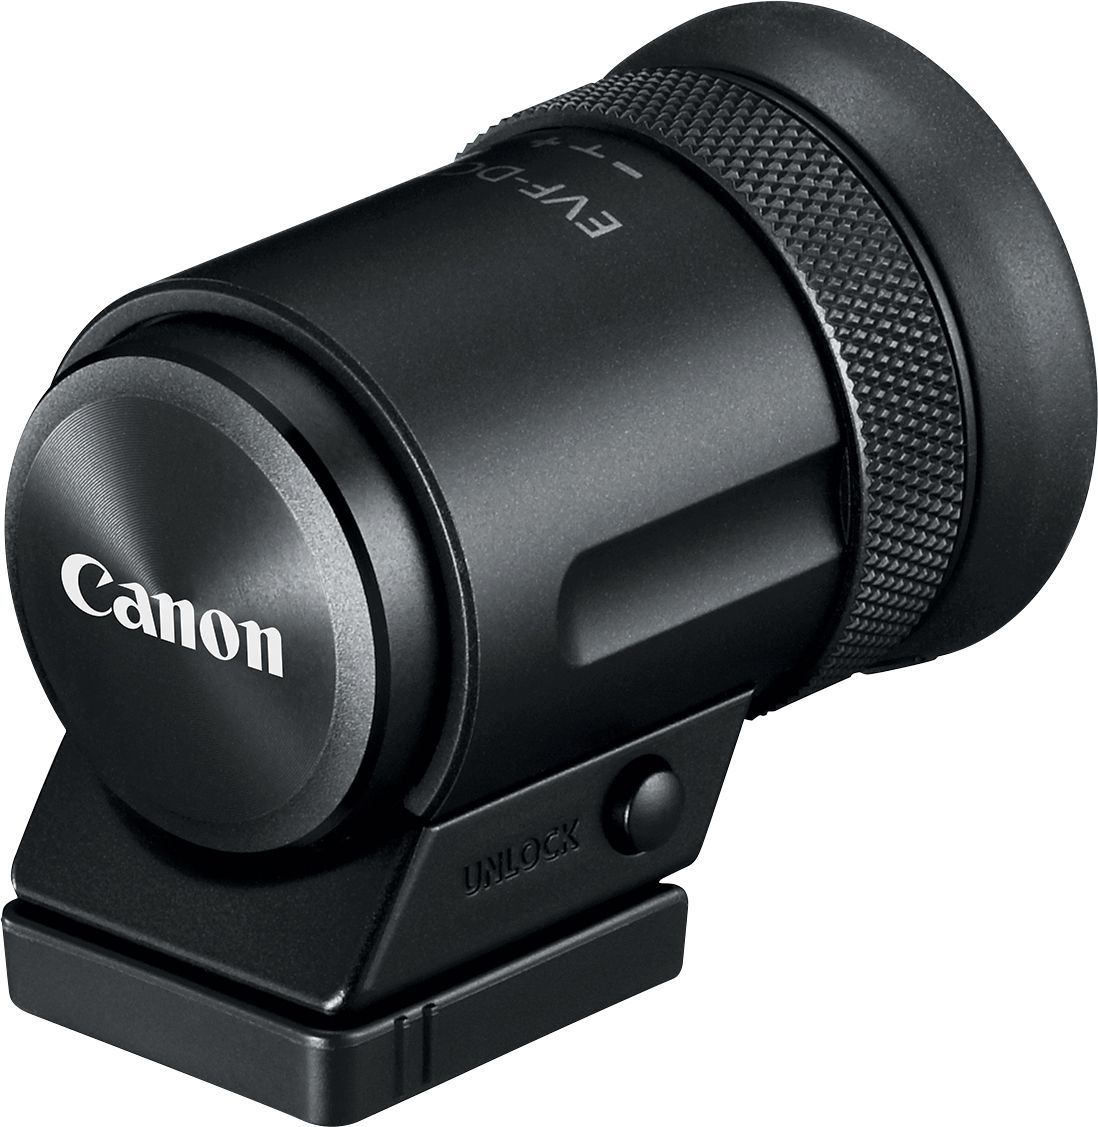 Angle View: Canon - EVF-DC2 Electronic Viewfinder - Black